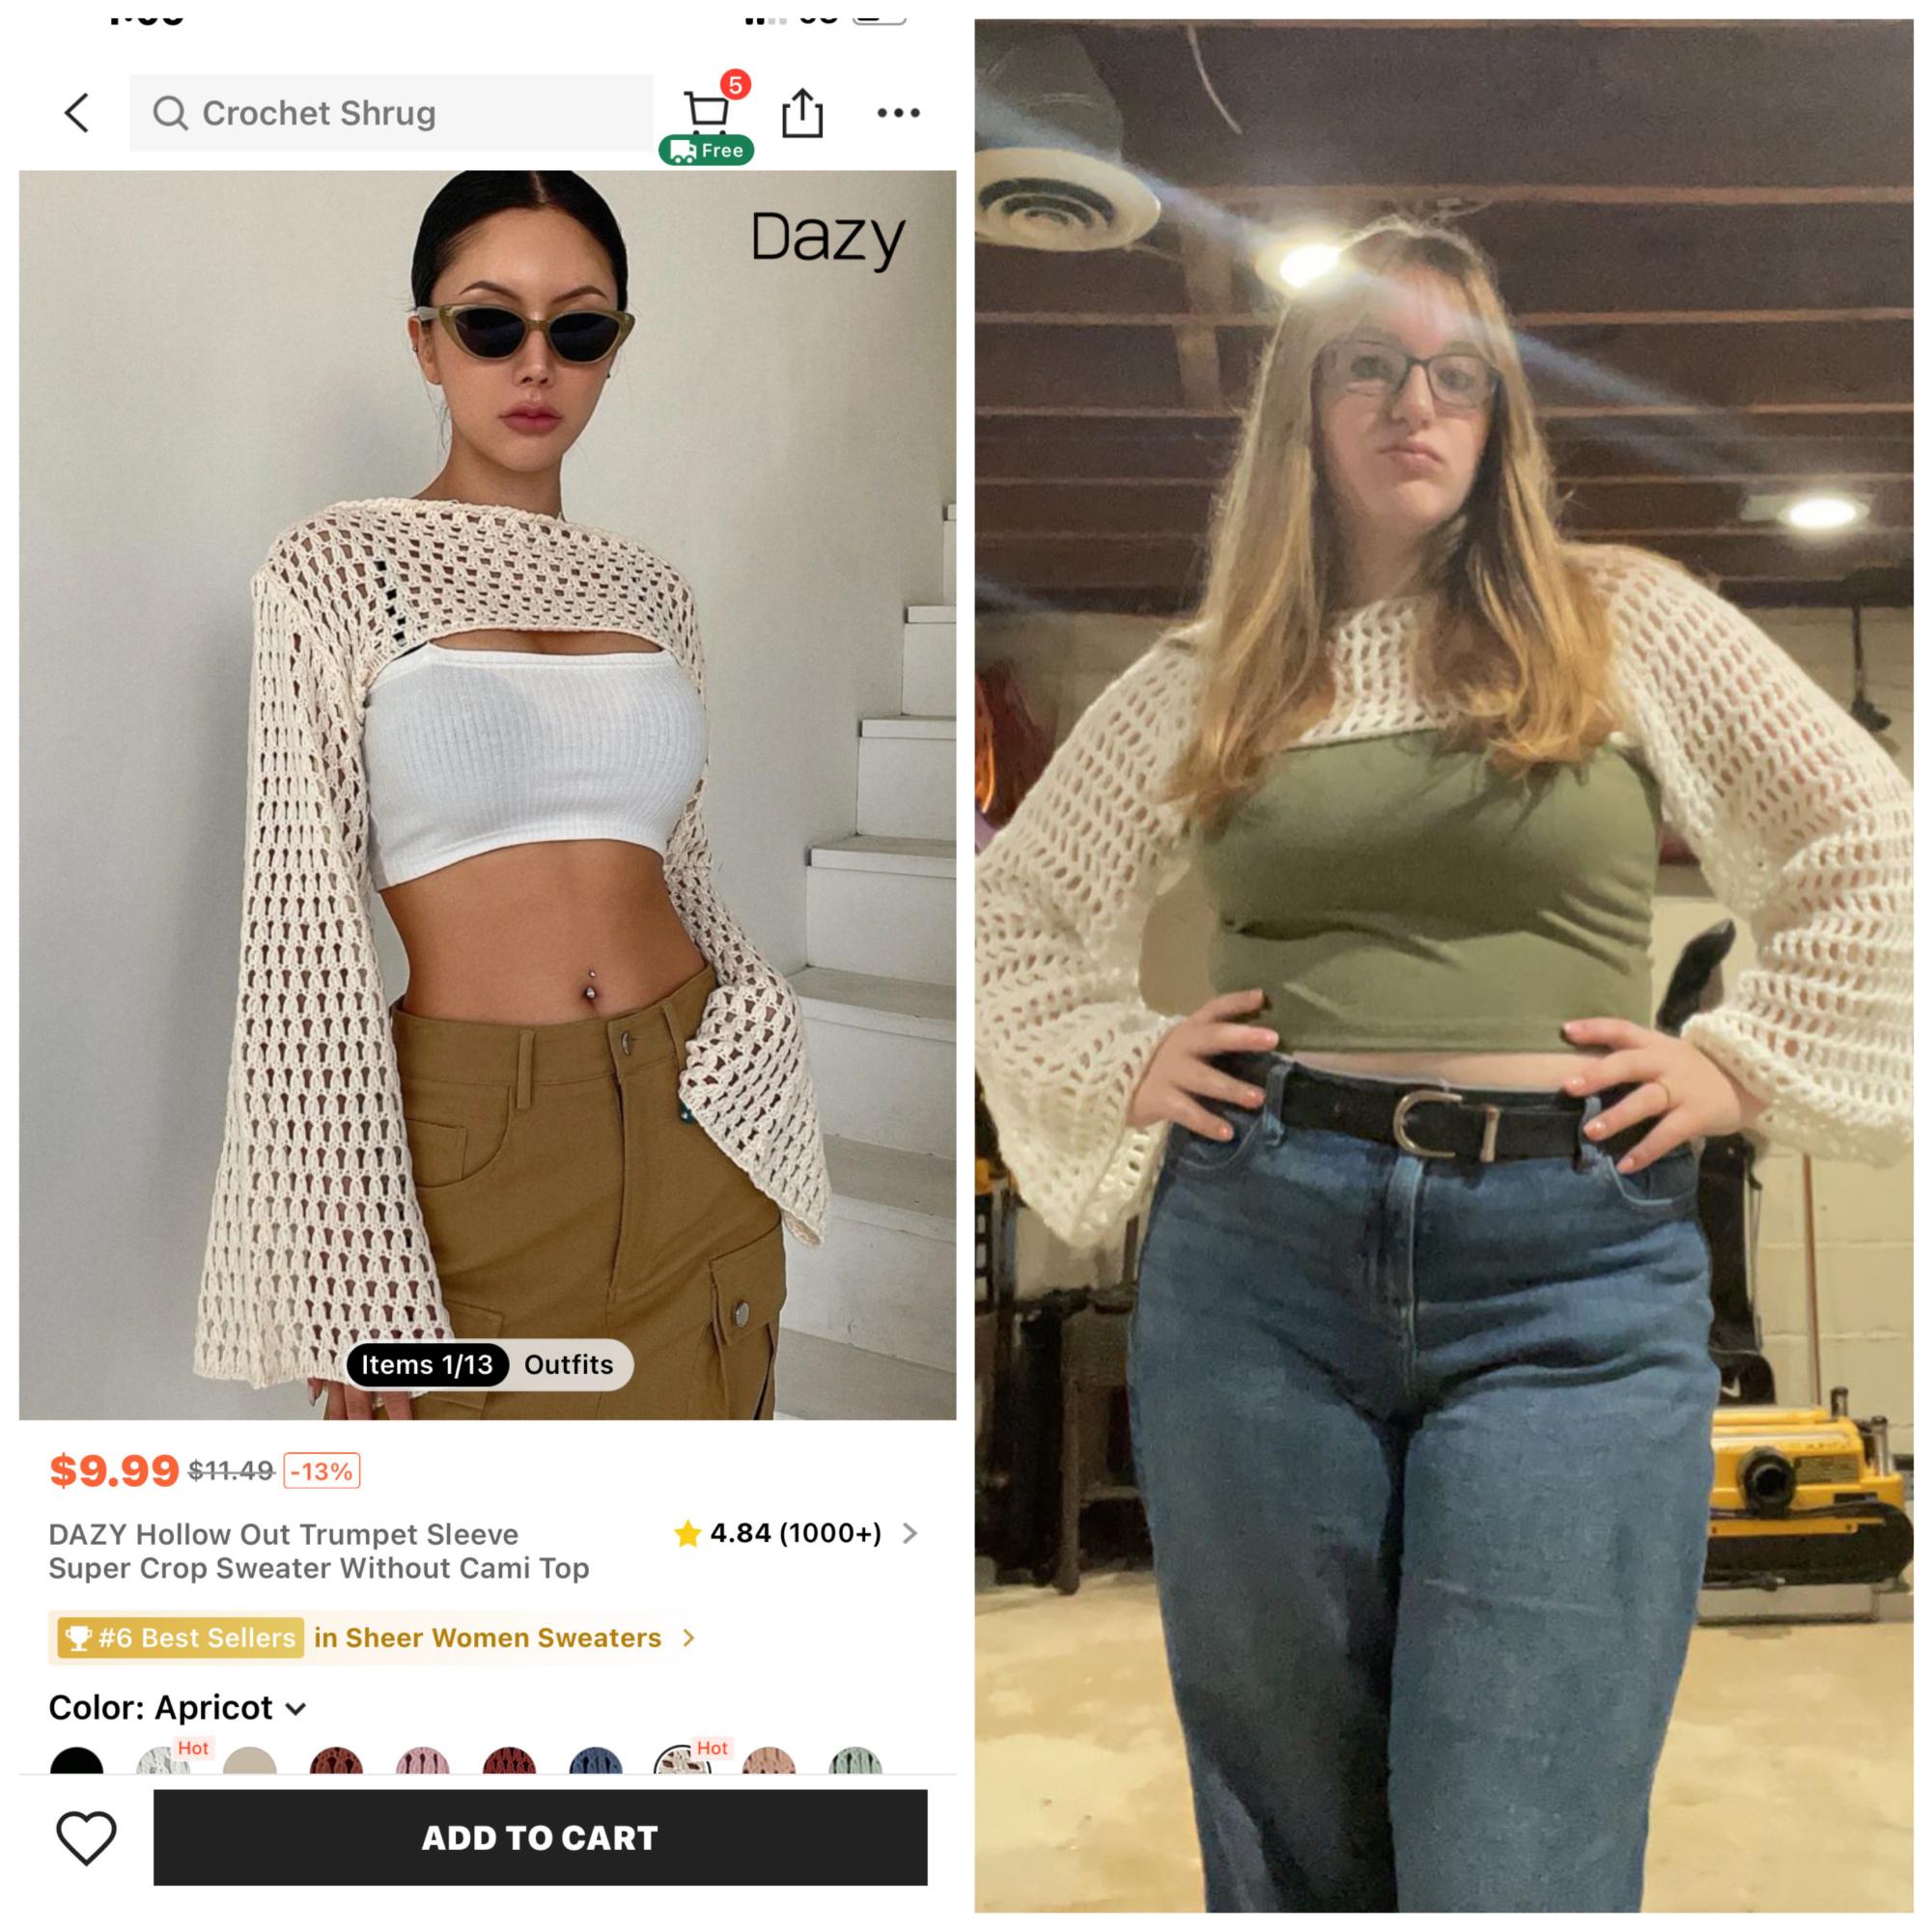 While the two shrugs look identical, the one on the left, offered by Shein, is created with machinery and is sold at a cheaper price. The crocheted item on the right is hand crafted and is higher quality and must be sold at a higher price to make profit.